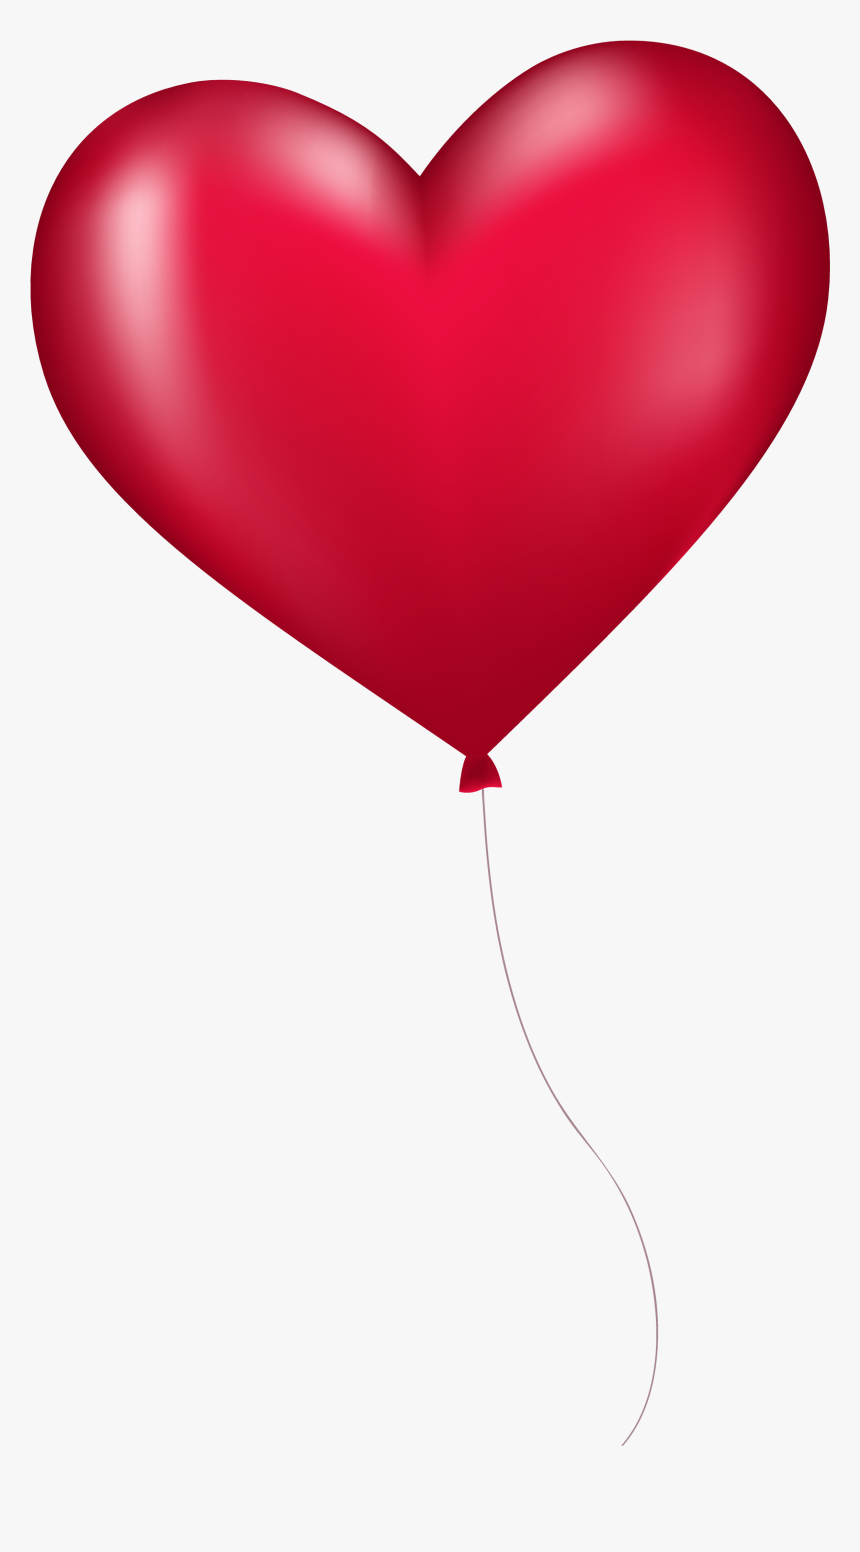 Heart Balloon Png Image - Balloons Png Heart Shaped Balloon, Transparent Png, Free Download